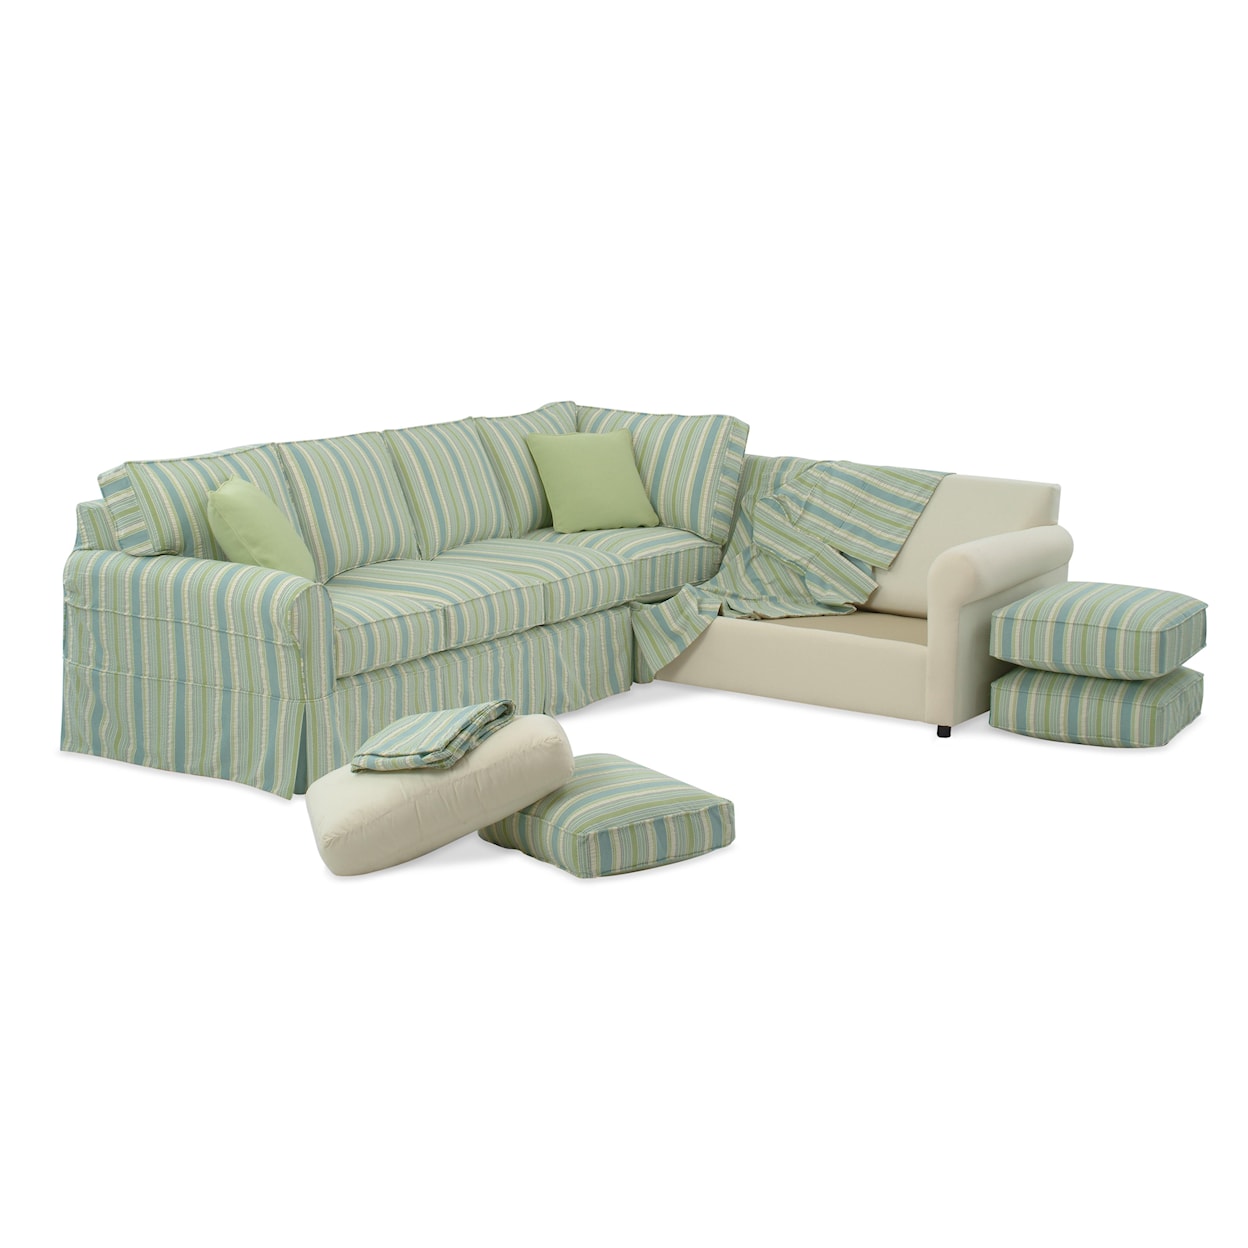 Braxton Culler Bedford Sectional Sofa with Slipcover